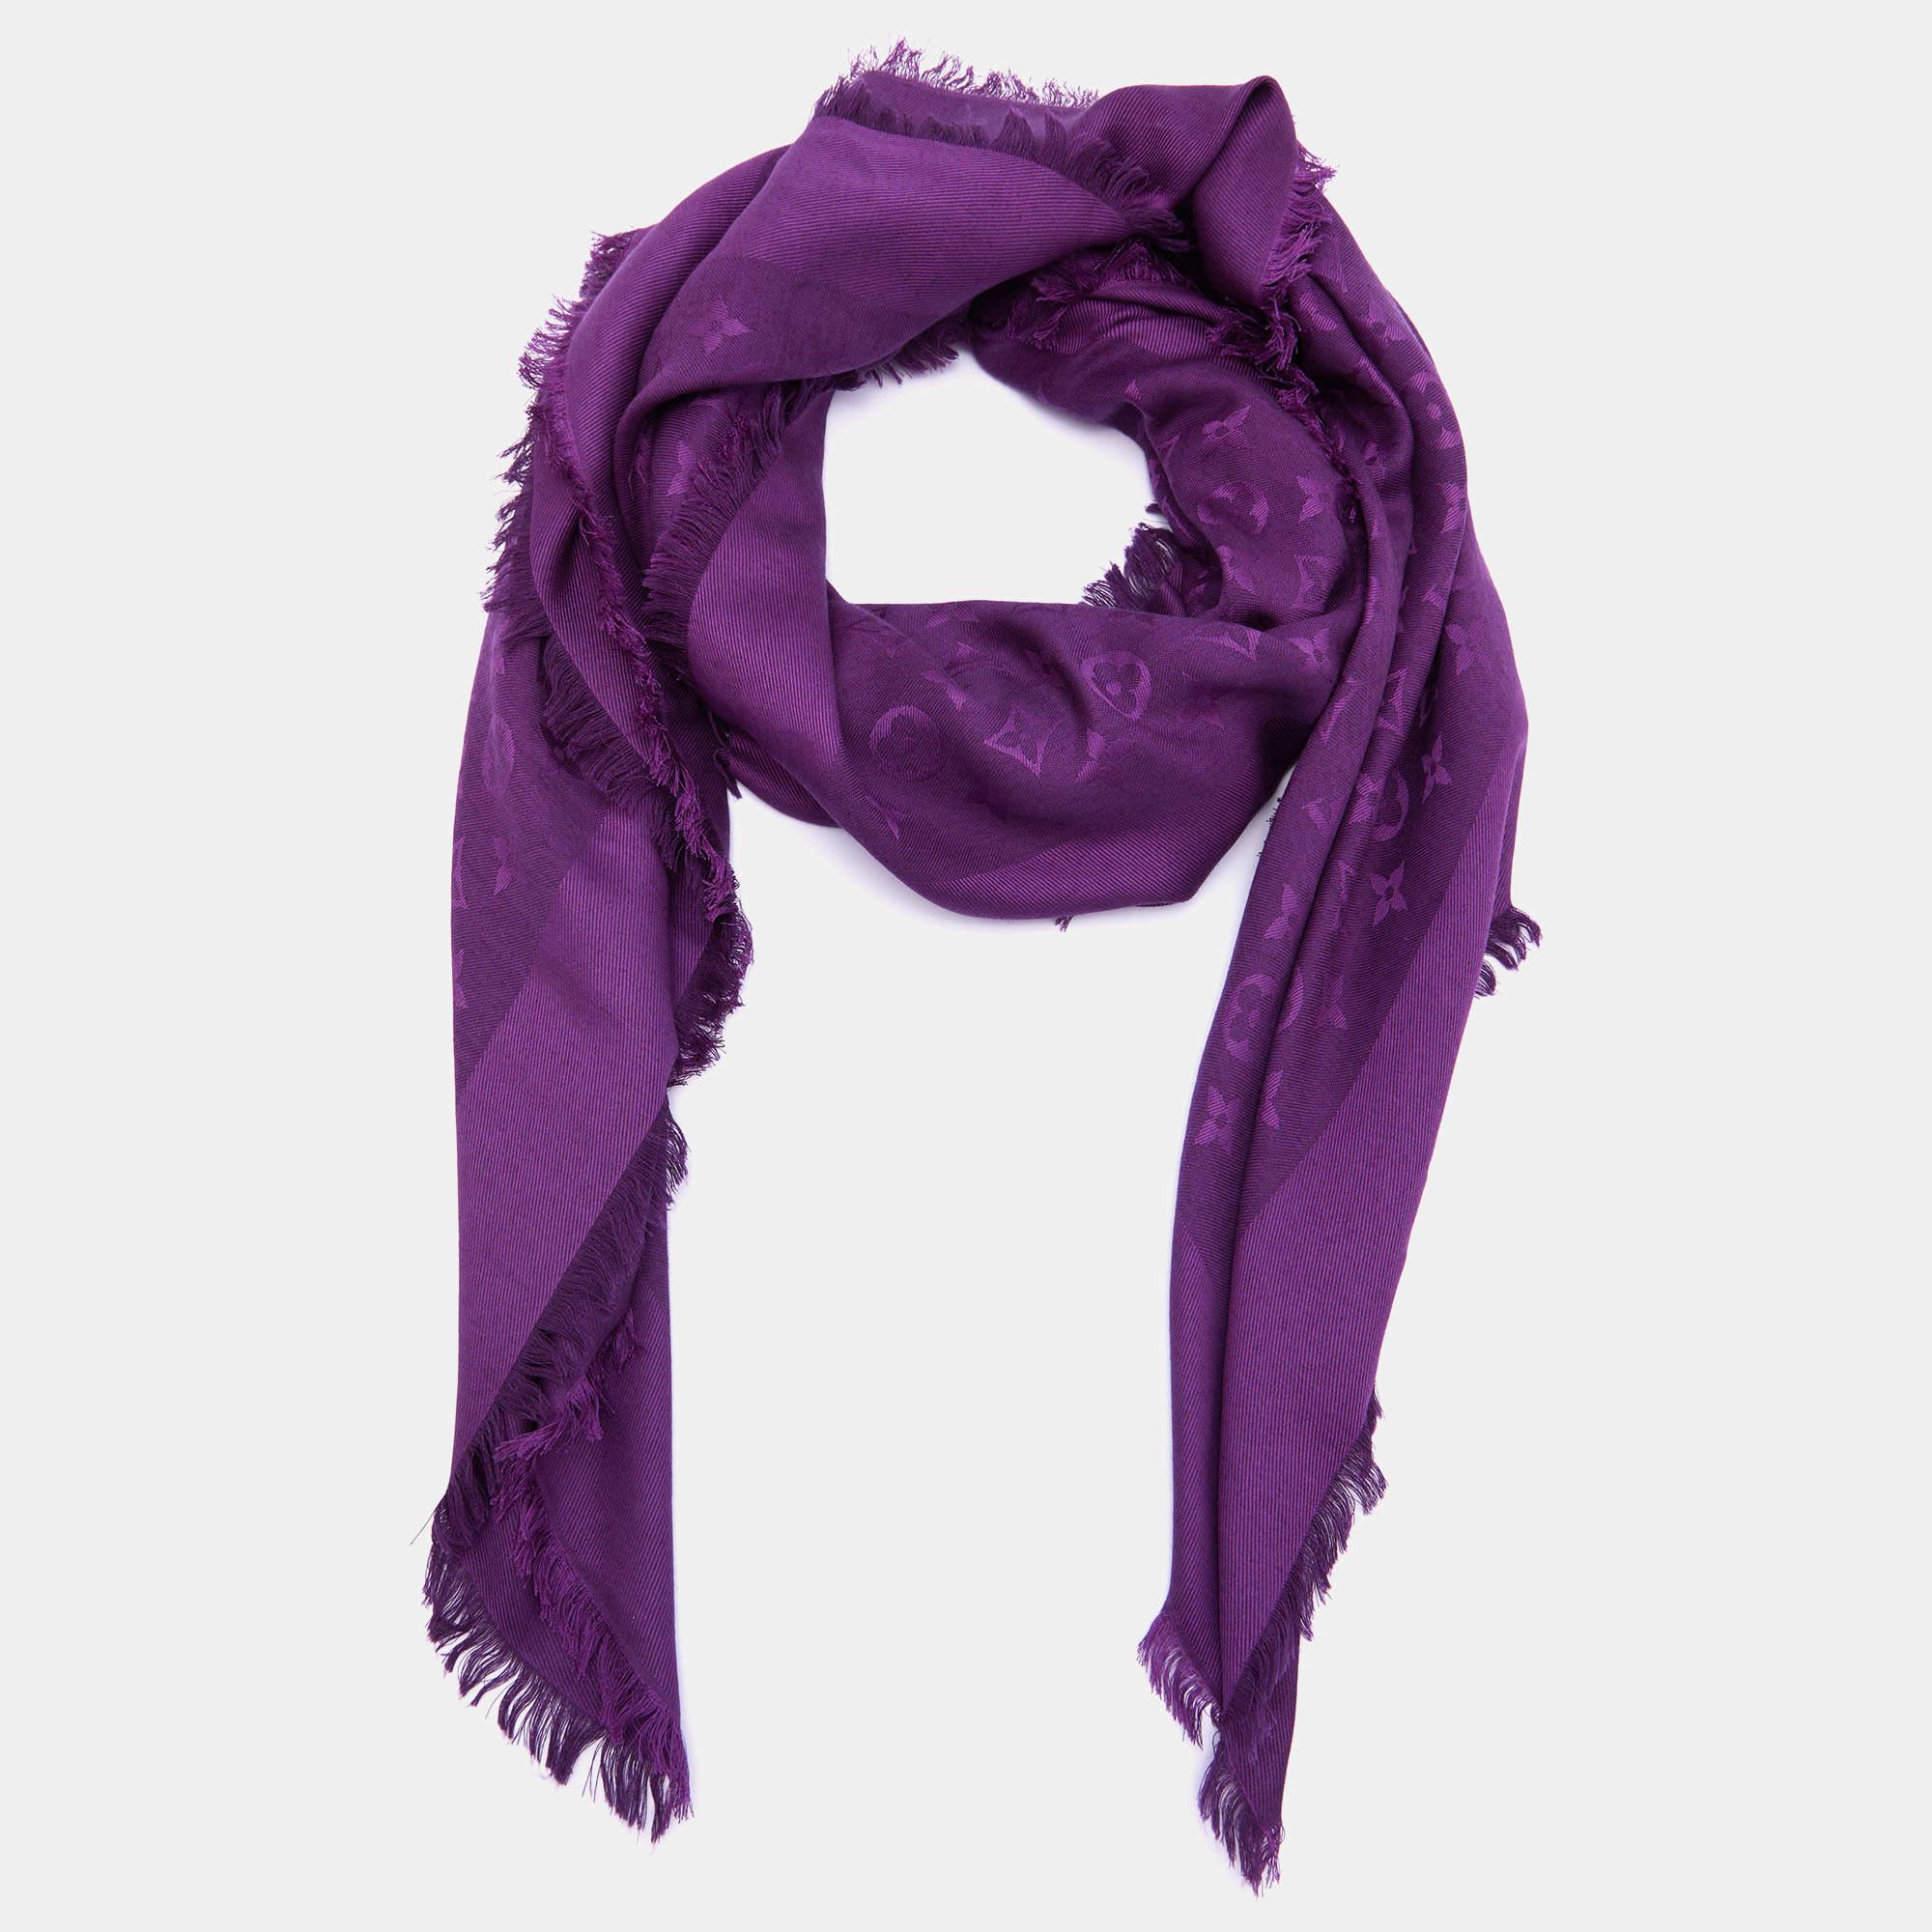 For days when you want your accessory to essay your style, this Louis Vuitton shawl is perfect. It carries a gorgeous shade with the signature monogram all over it. This shawl is created from quality fabrics for a luxurious feel and is completed